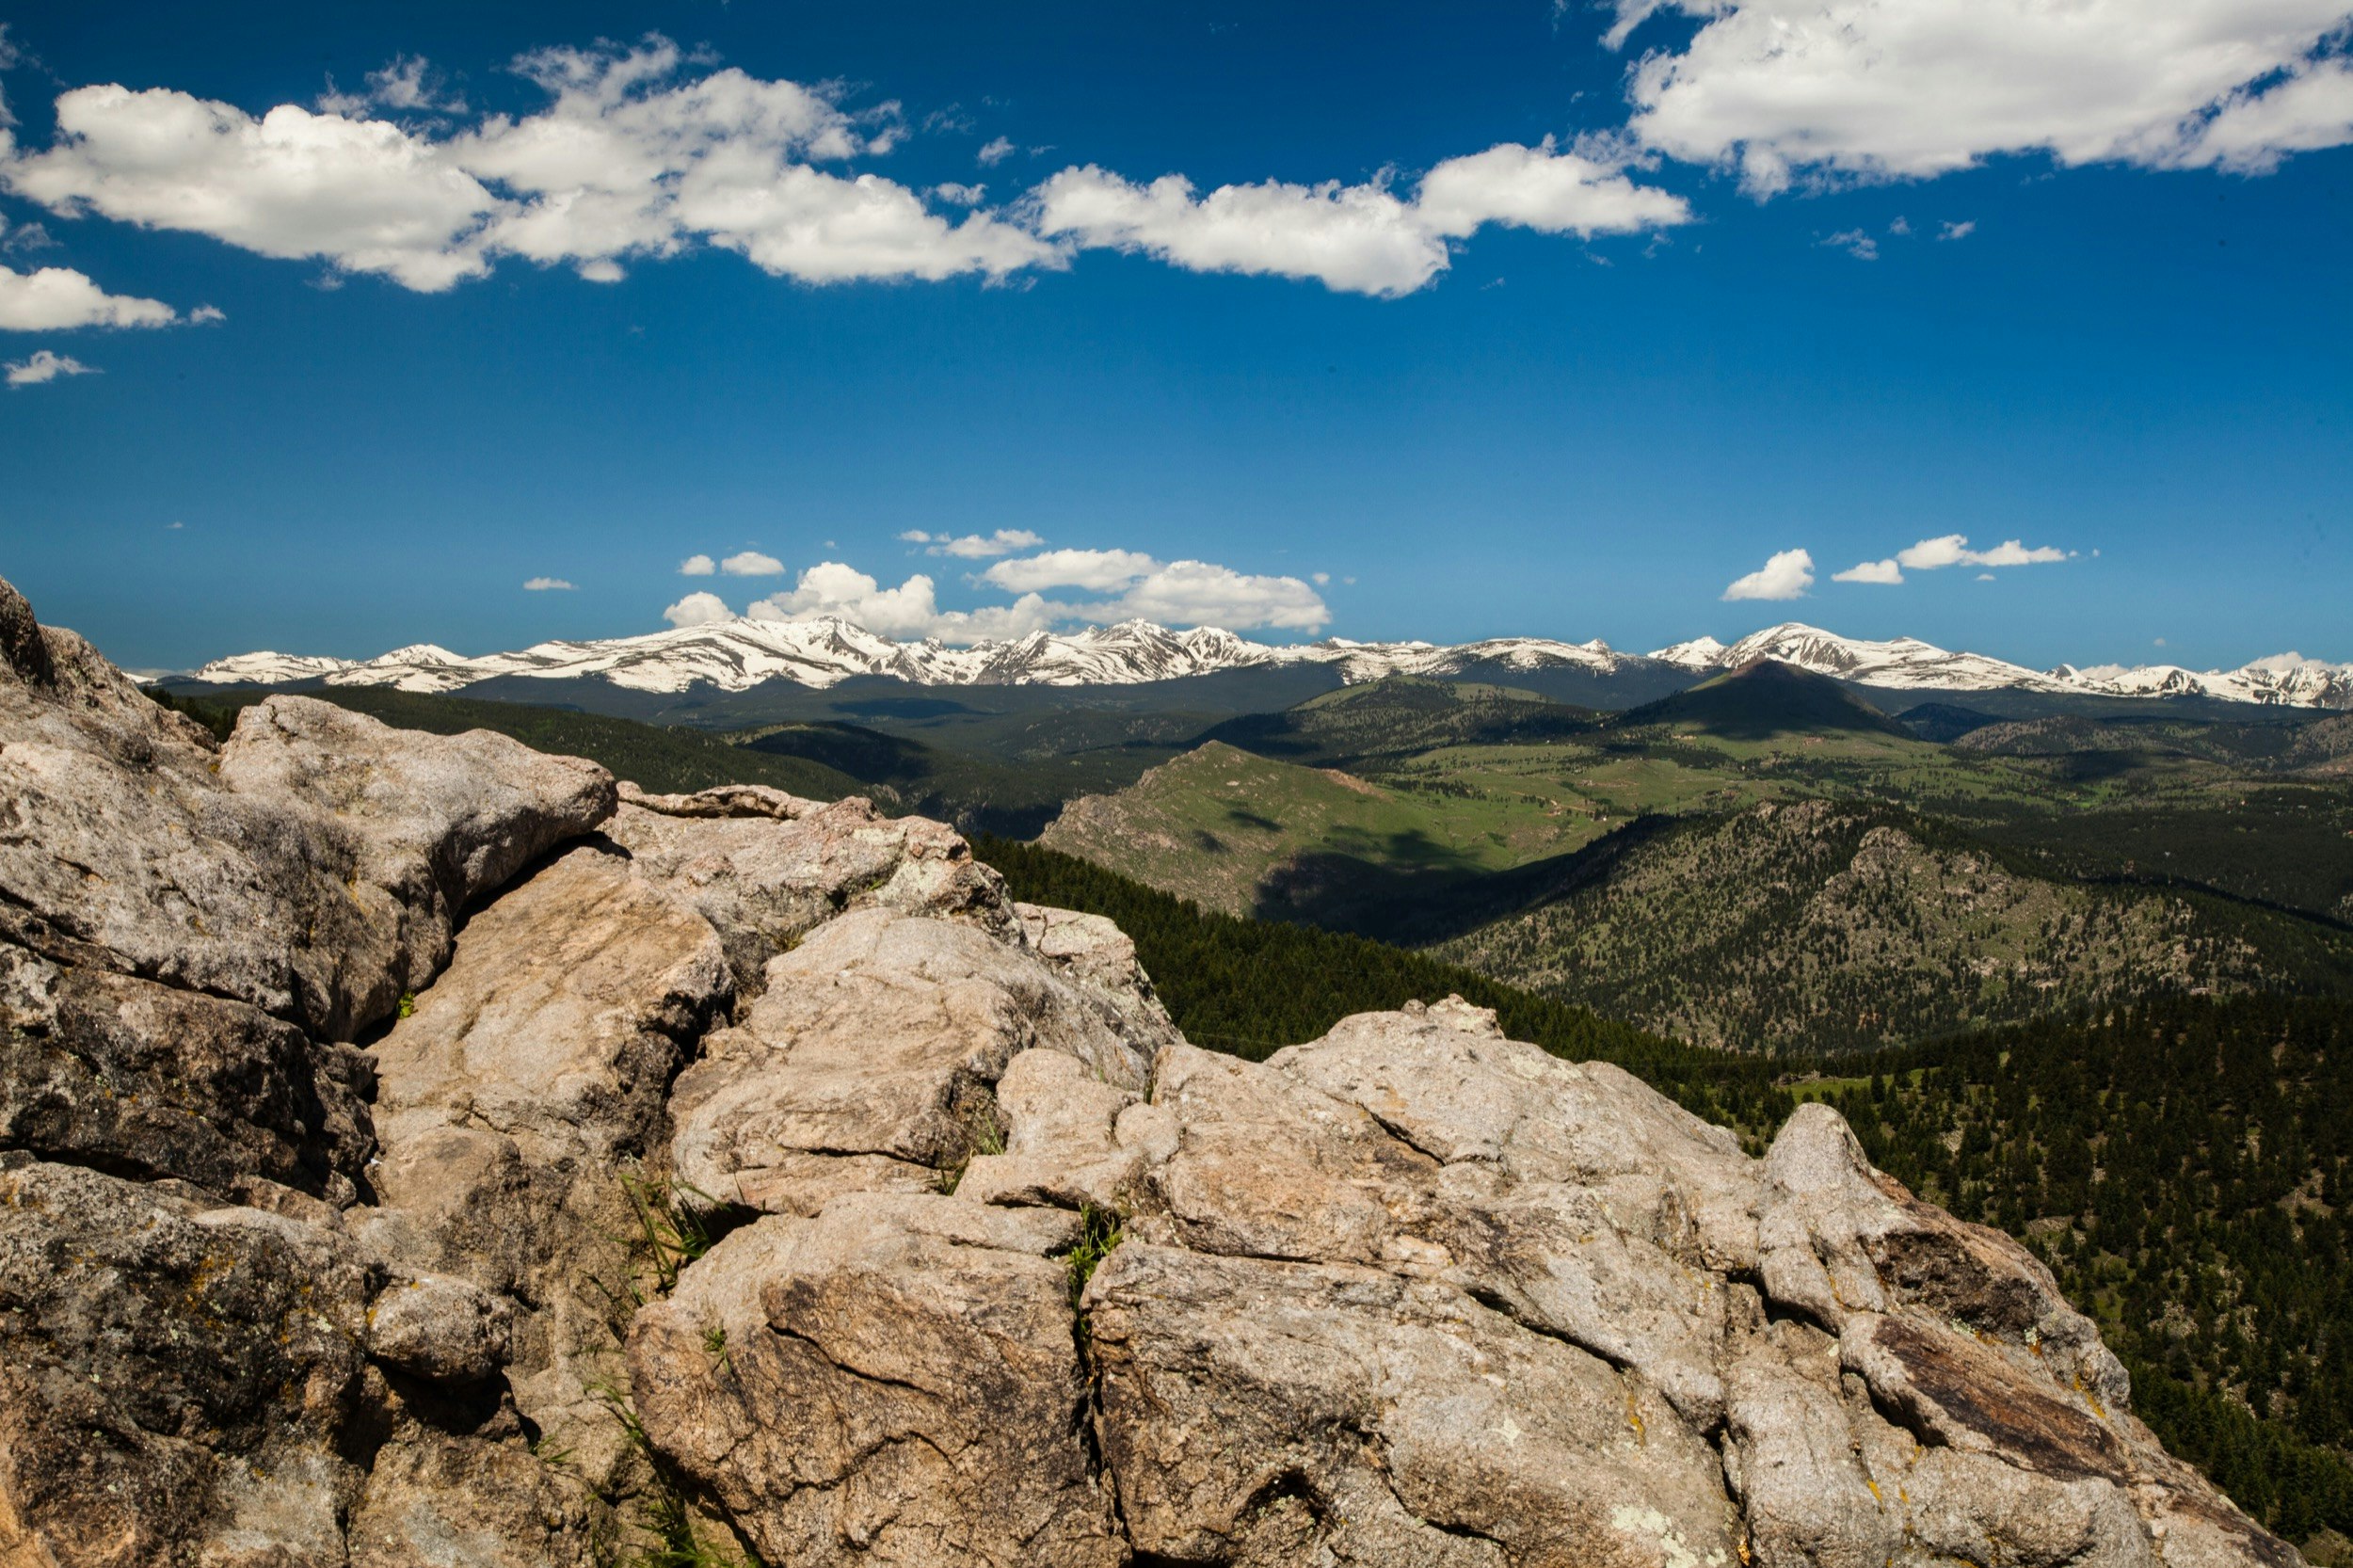 Snow capped mountains rise in the distance beneath a brilliant blue sky as large boulders and rocks dominate the foreground of a mountain near Boulder, Colorado; Hiking